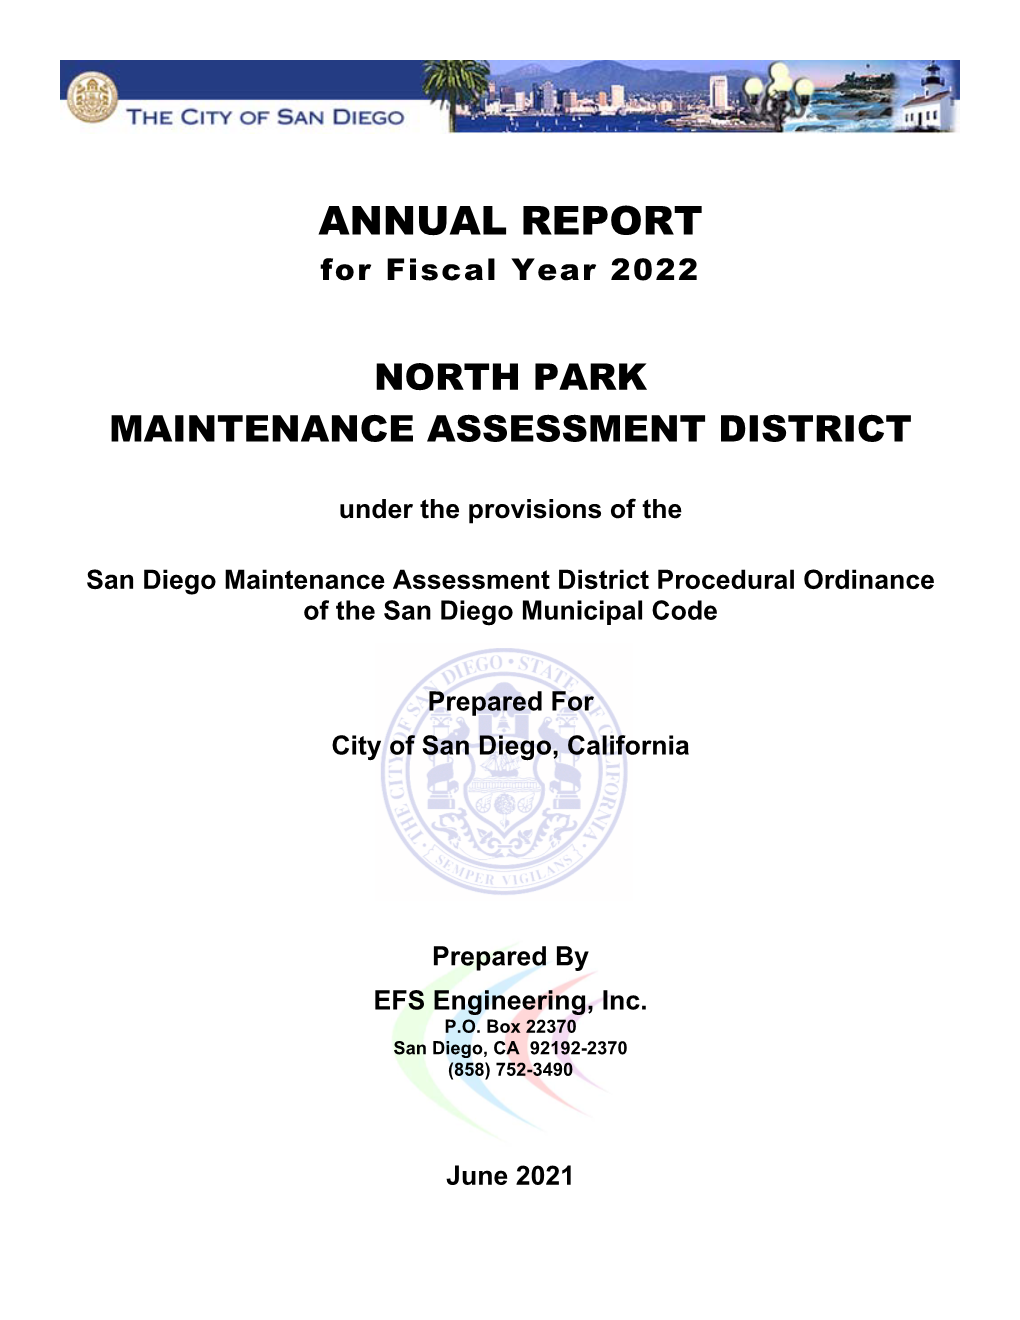 ANNUAL REPORT for Fiscal Year 2022